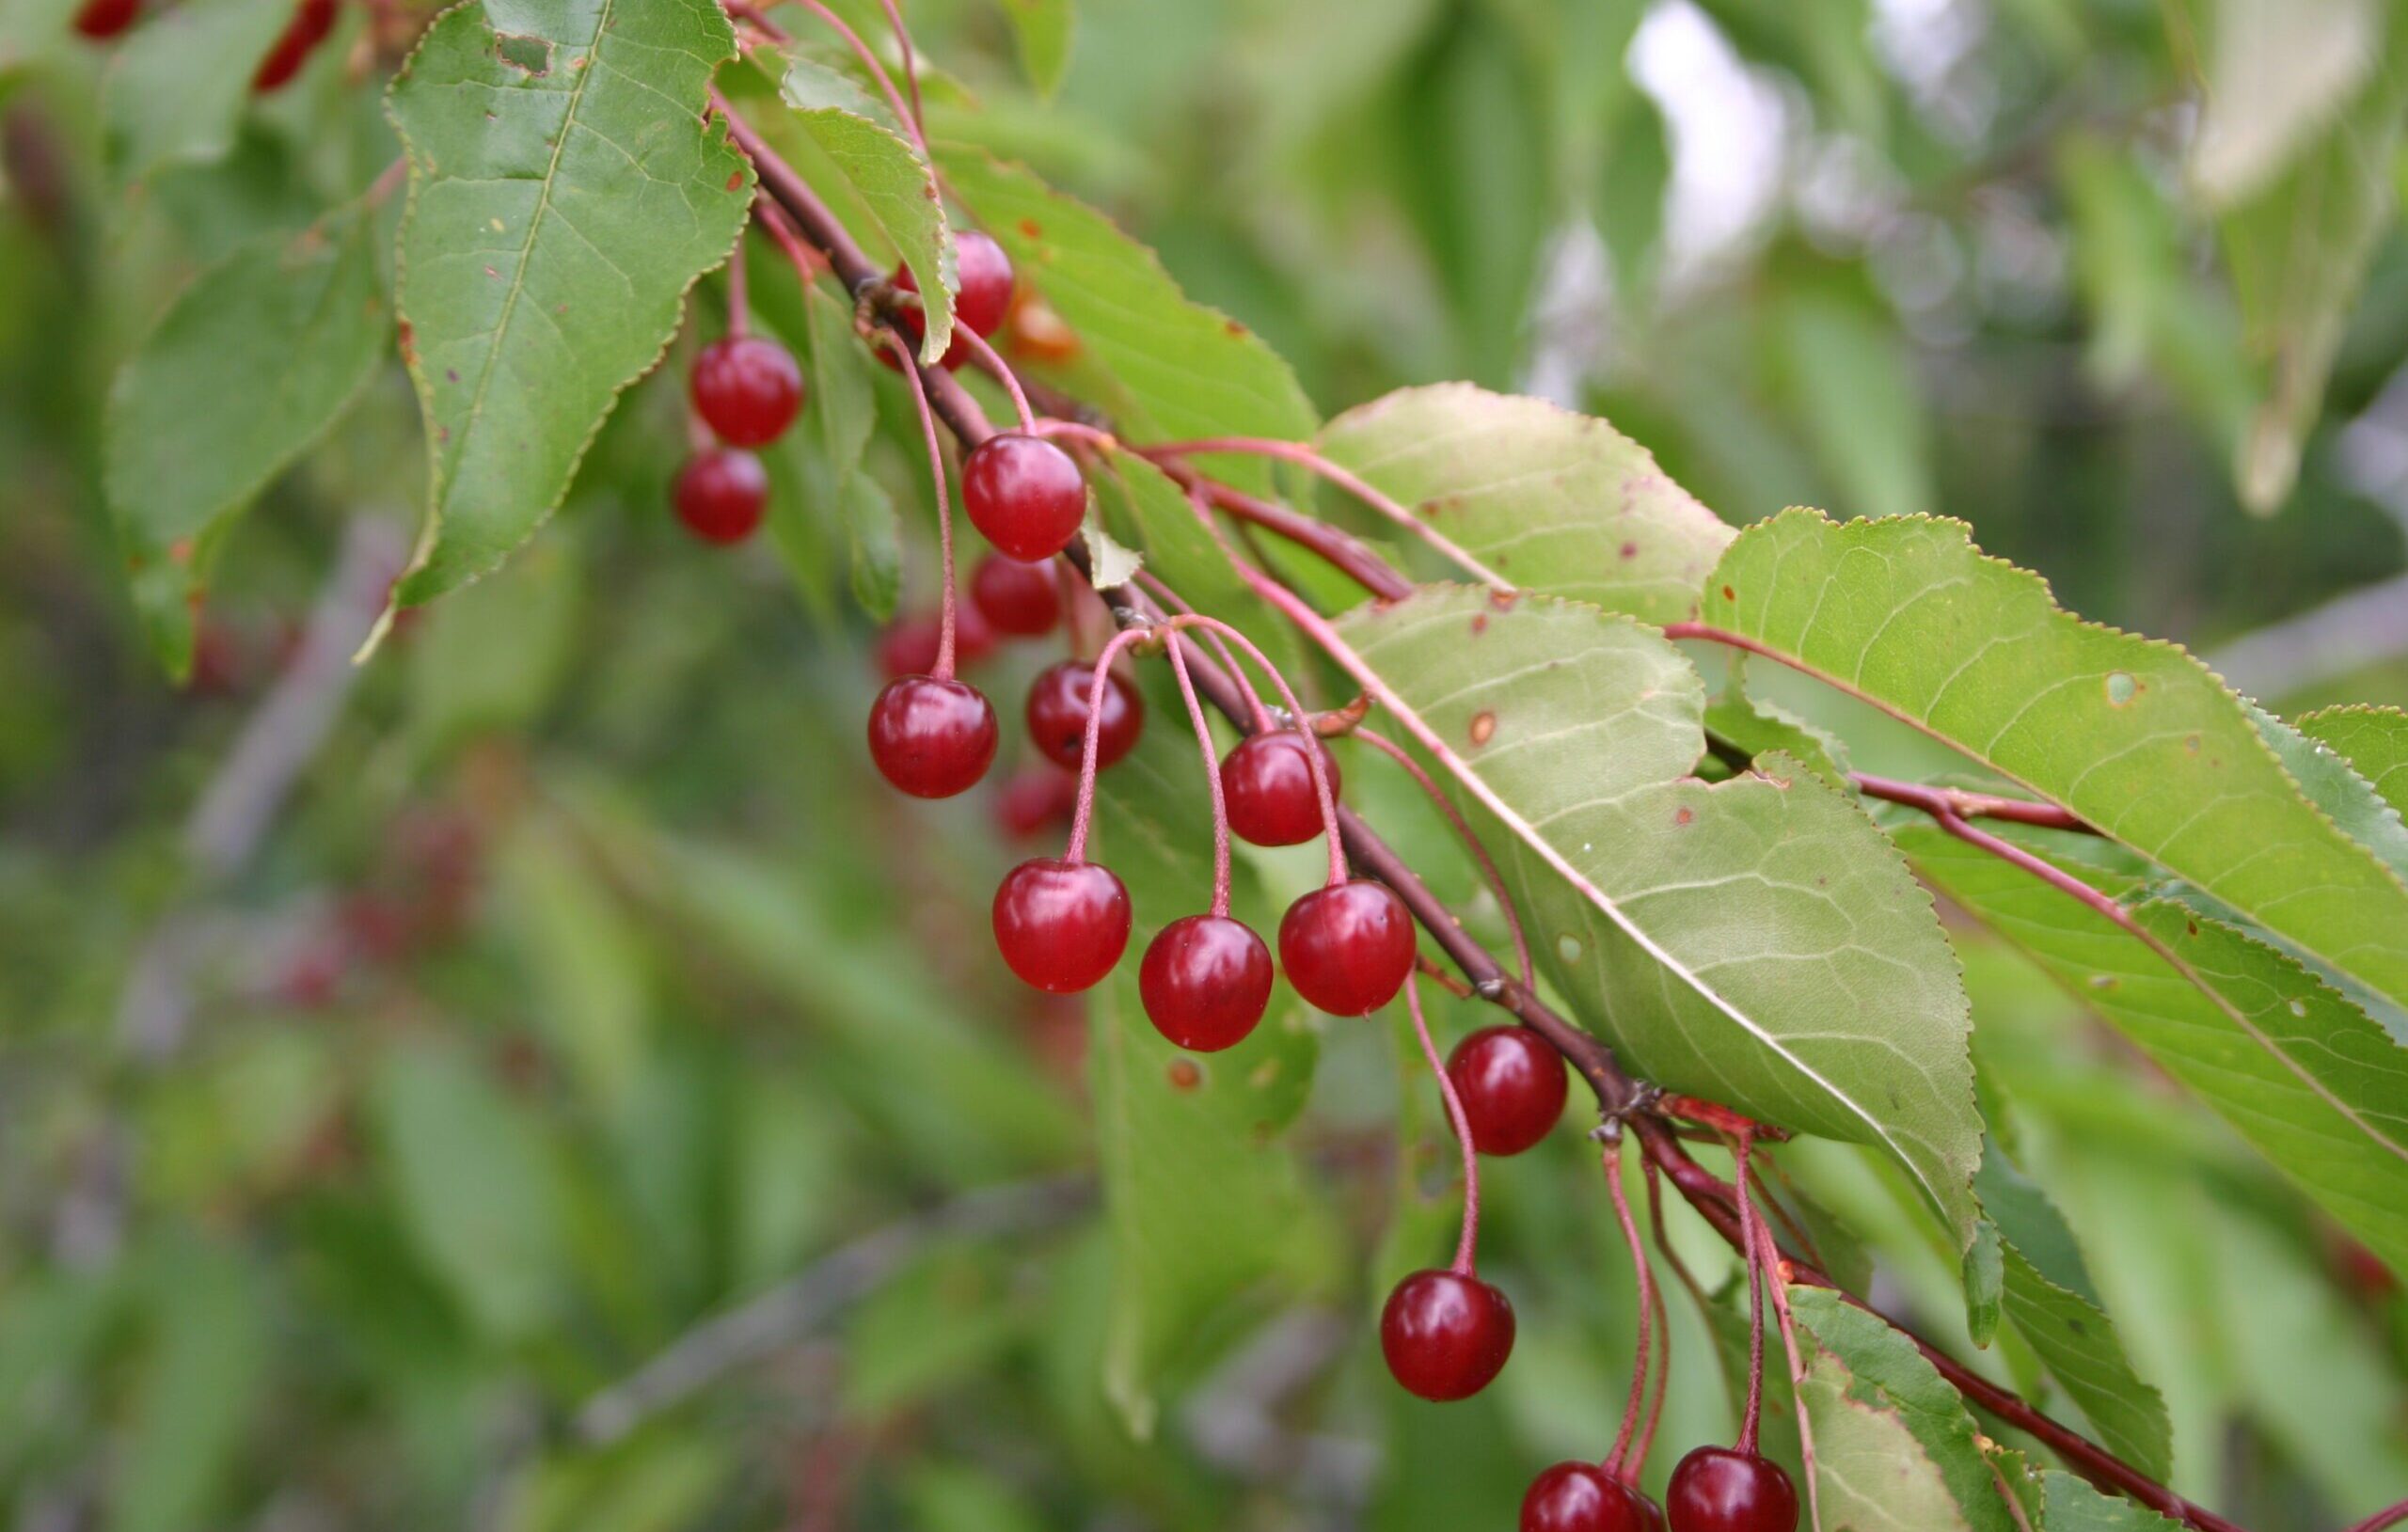 Small red Pin cherries growing along a leaved branch.